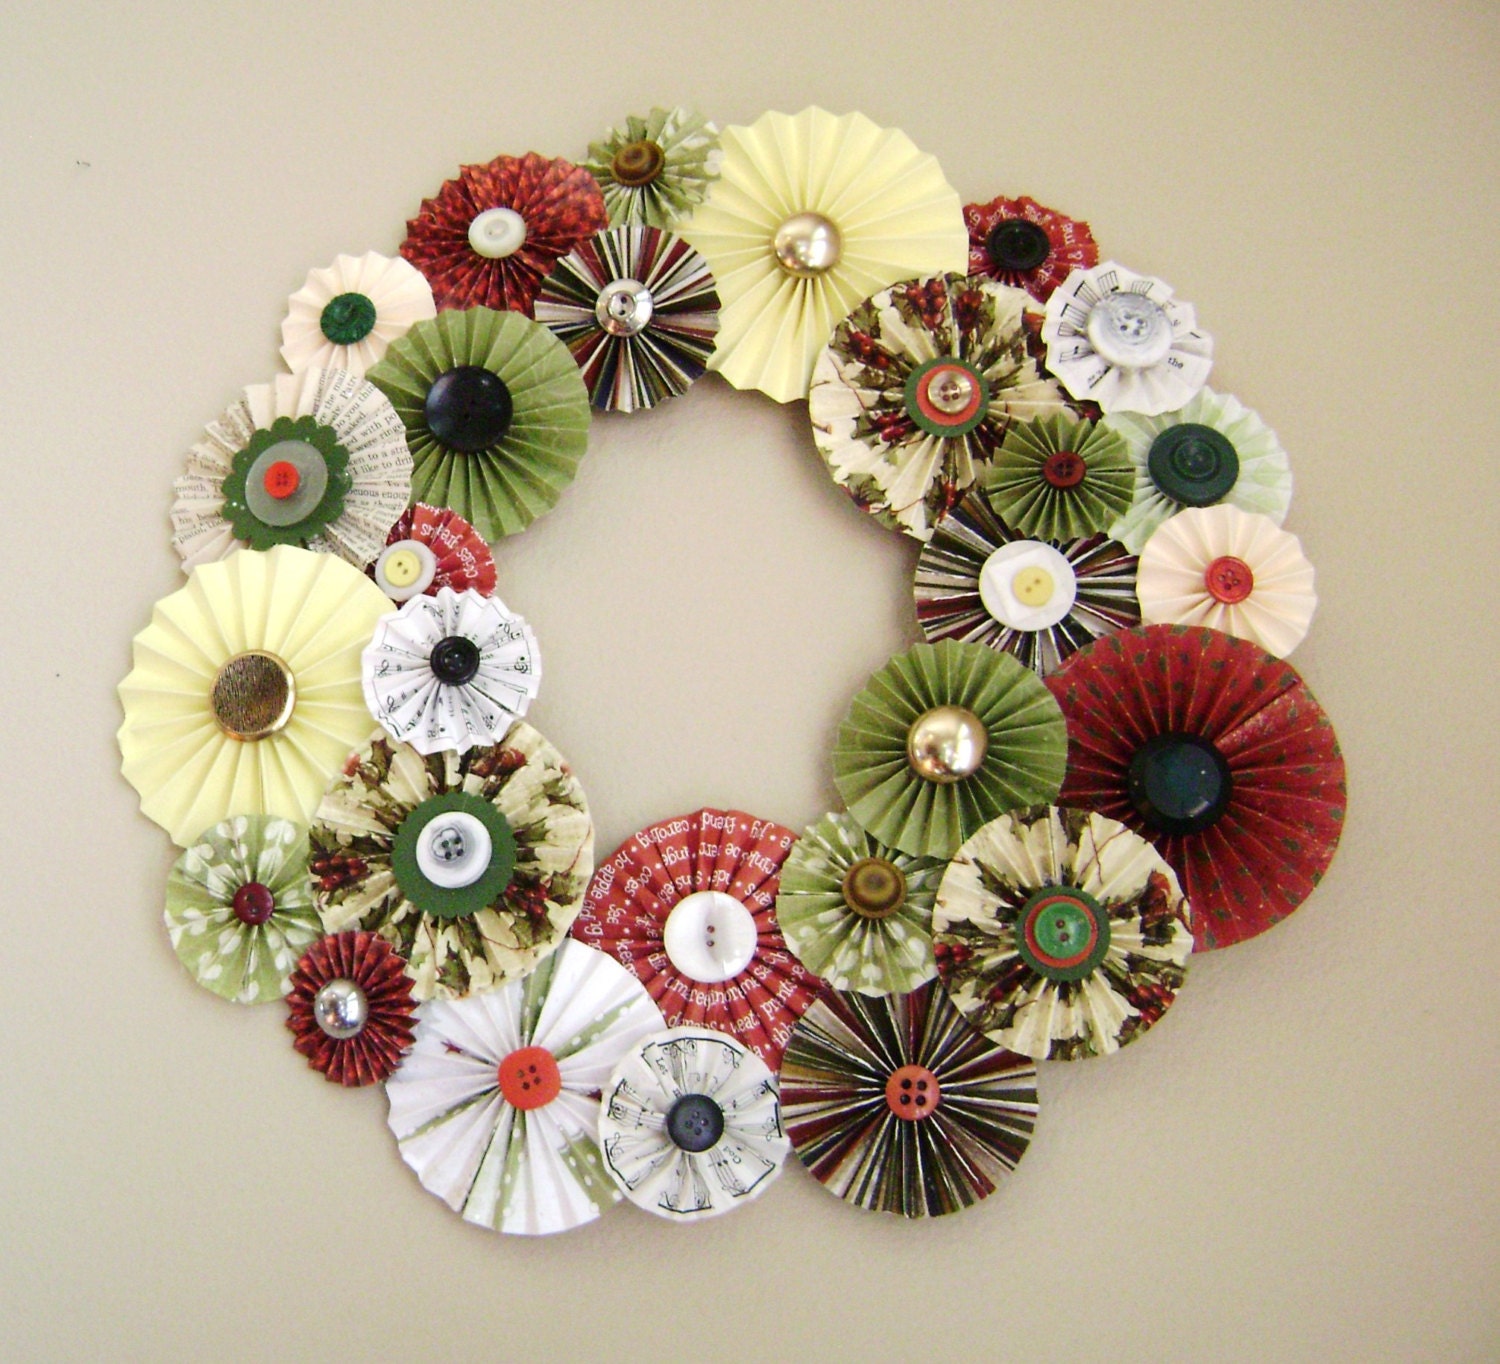 Christmas wreath red green,yellow, vintage book page and sheet music fan fold accordian style pinwheel button centers